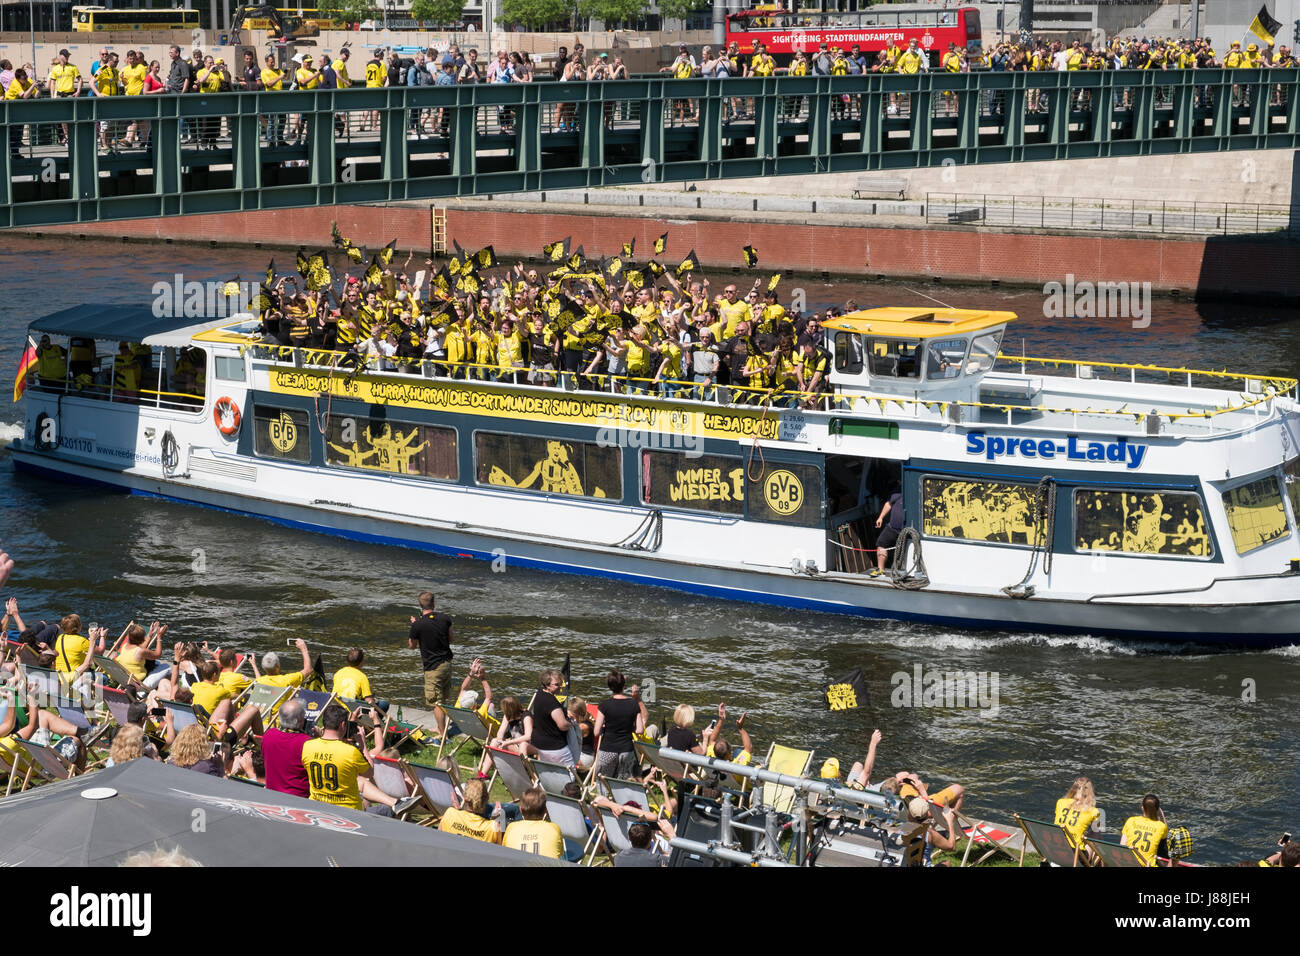 Berlin, Germany - may 27, 2017: Many BVB Fans / Borussia Dortmund Fans on boat, riverside and bridge in  Berlin on the day of the DFB-Pokal final. Stock Photo